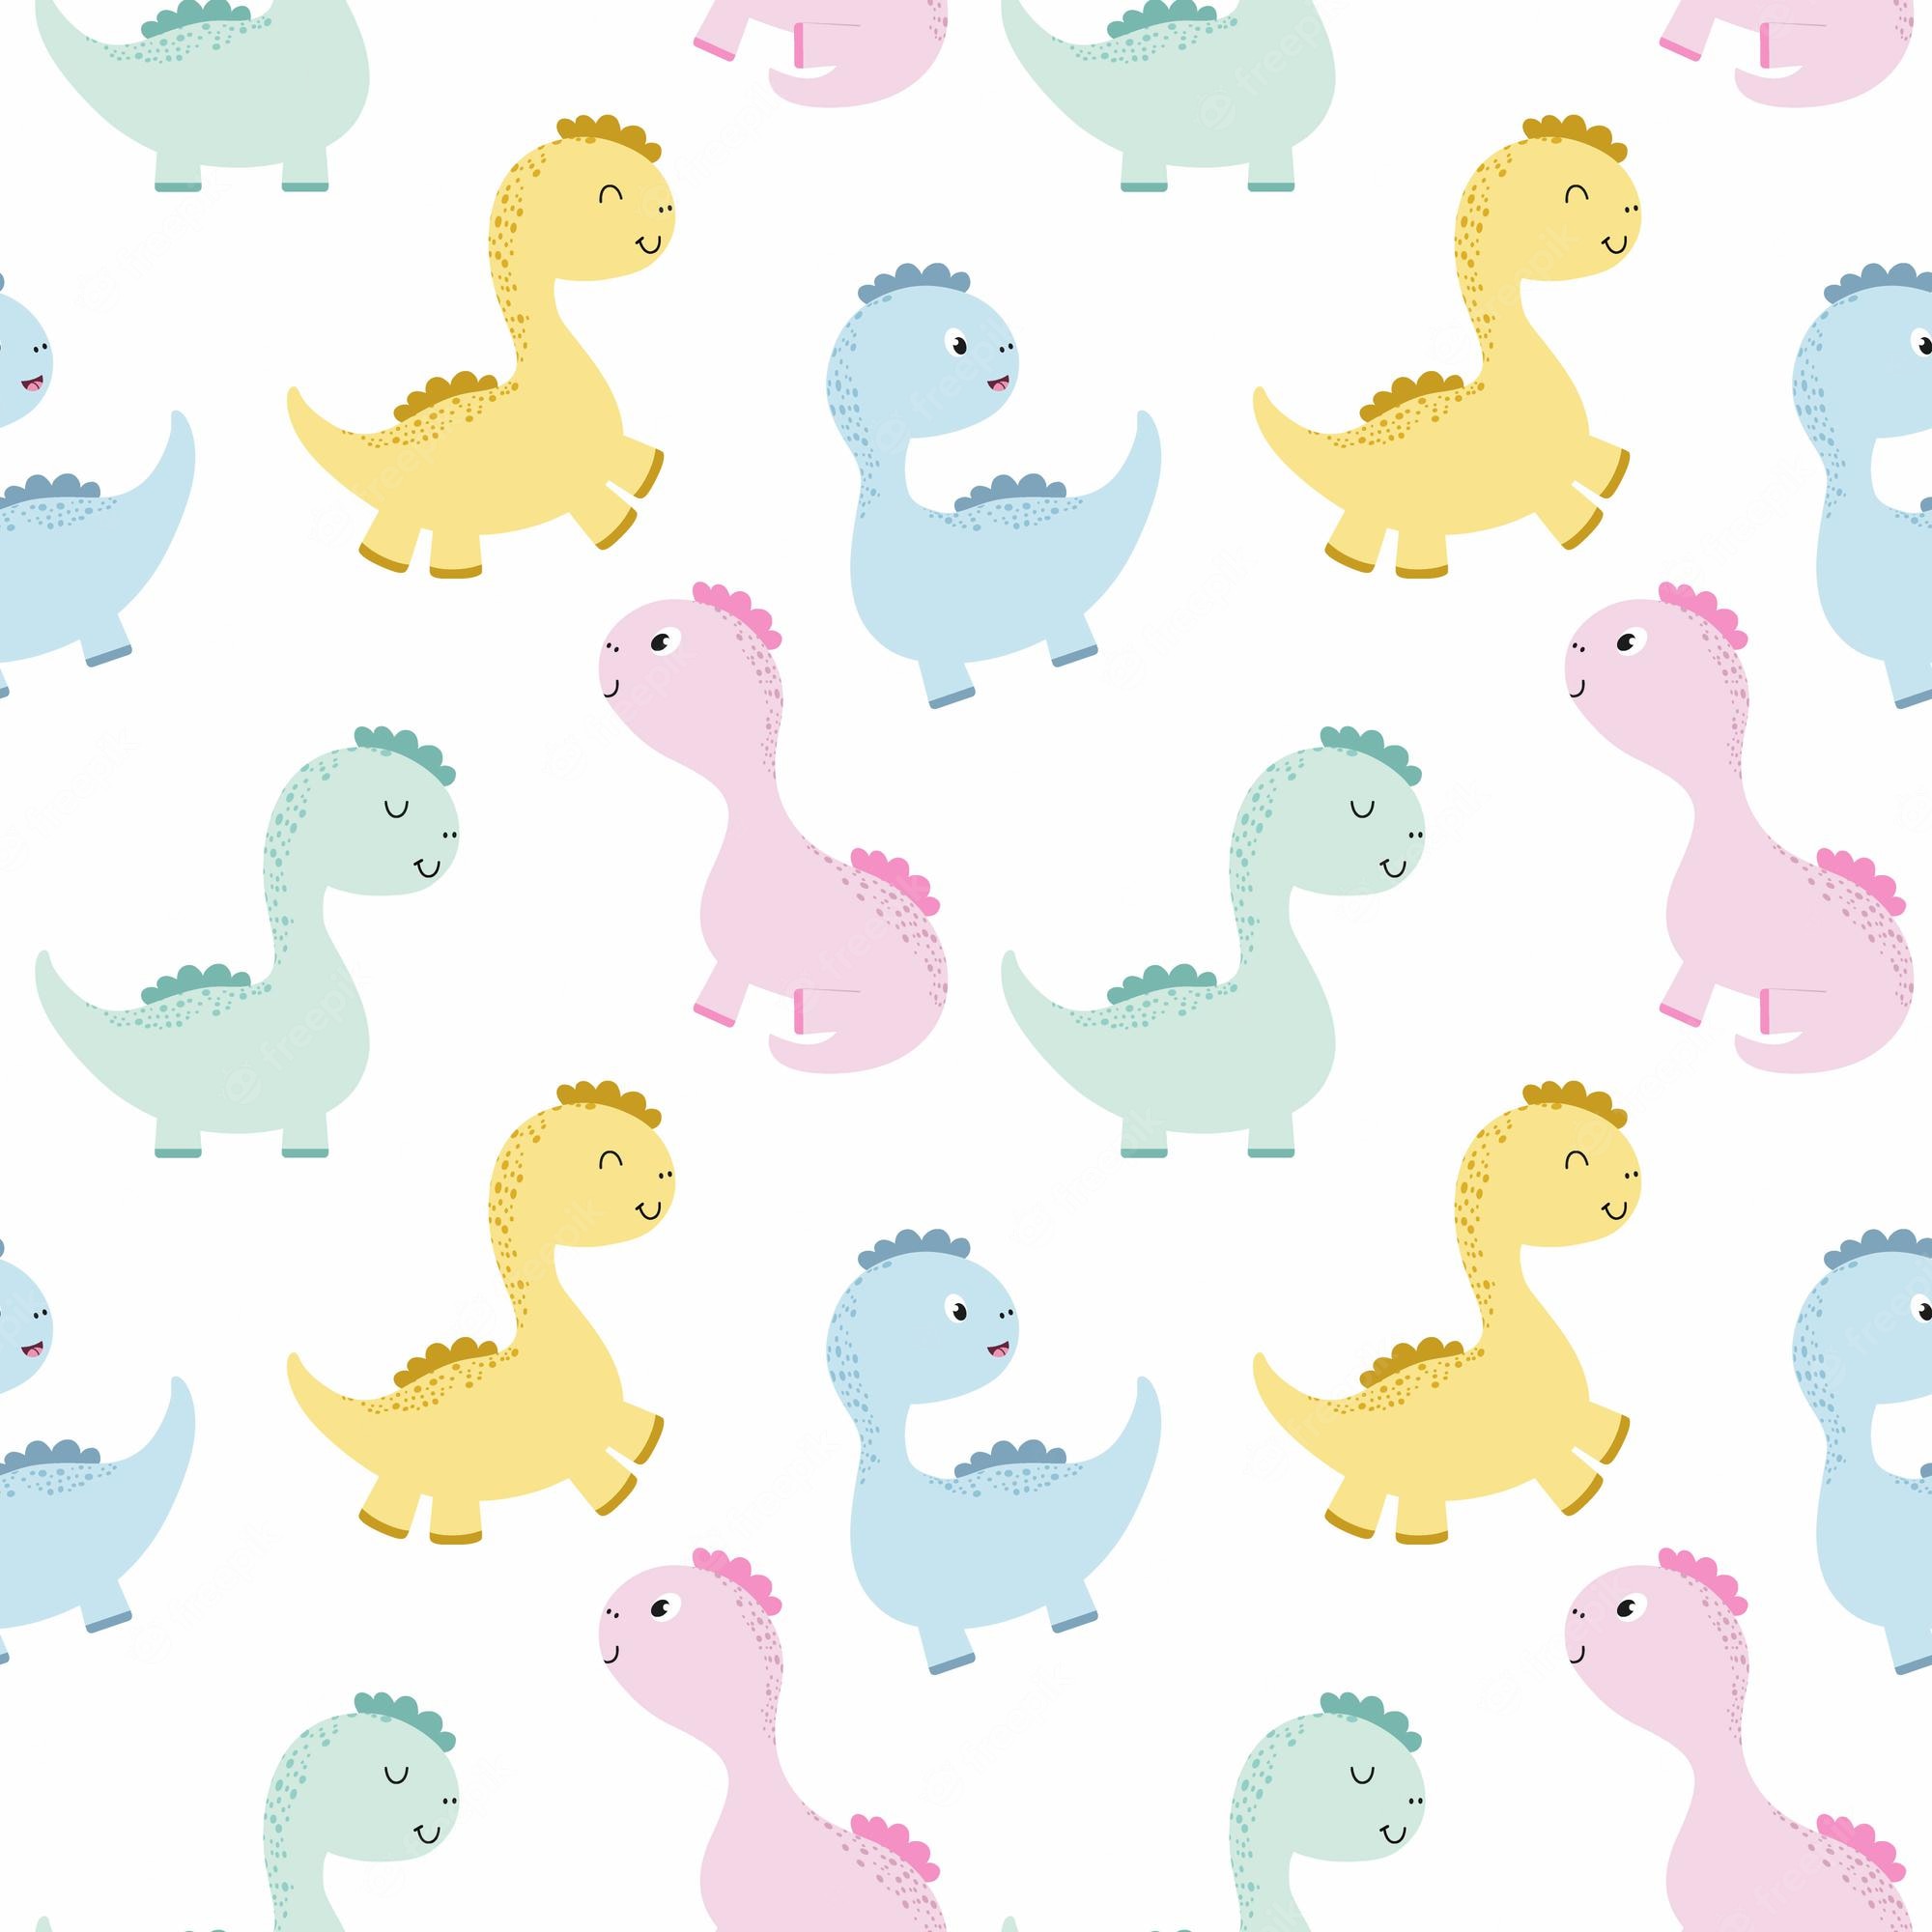 Premium vector endless background with cute dinosaurs for baby monster dragon and dinosaur vector pattern for printing on wallpaper fabric clothing packaging paper for birthday